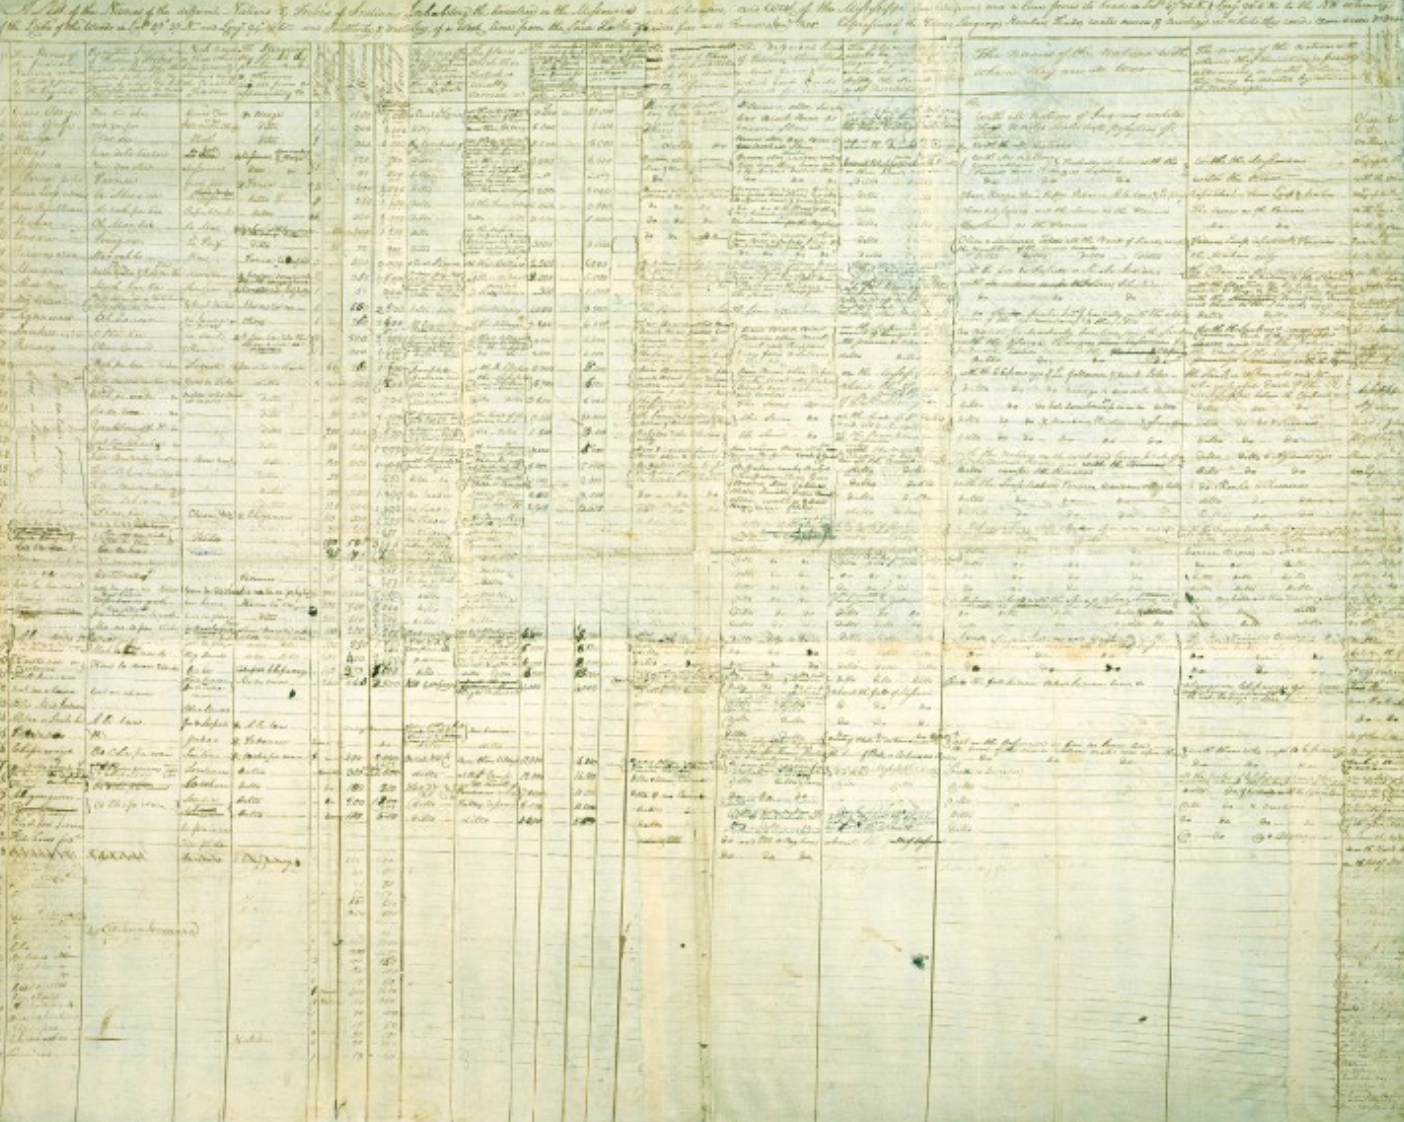 William Clark's chart of eastern Indian tribes